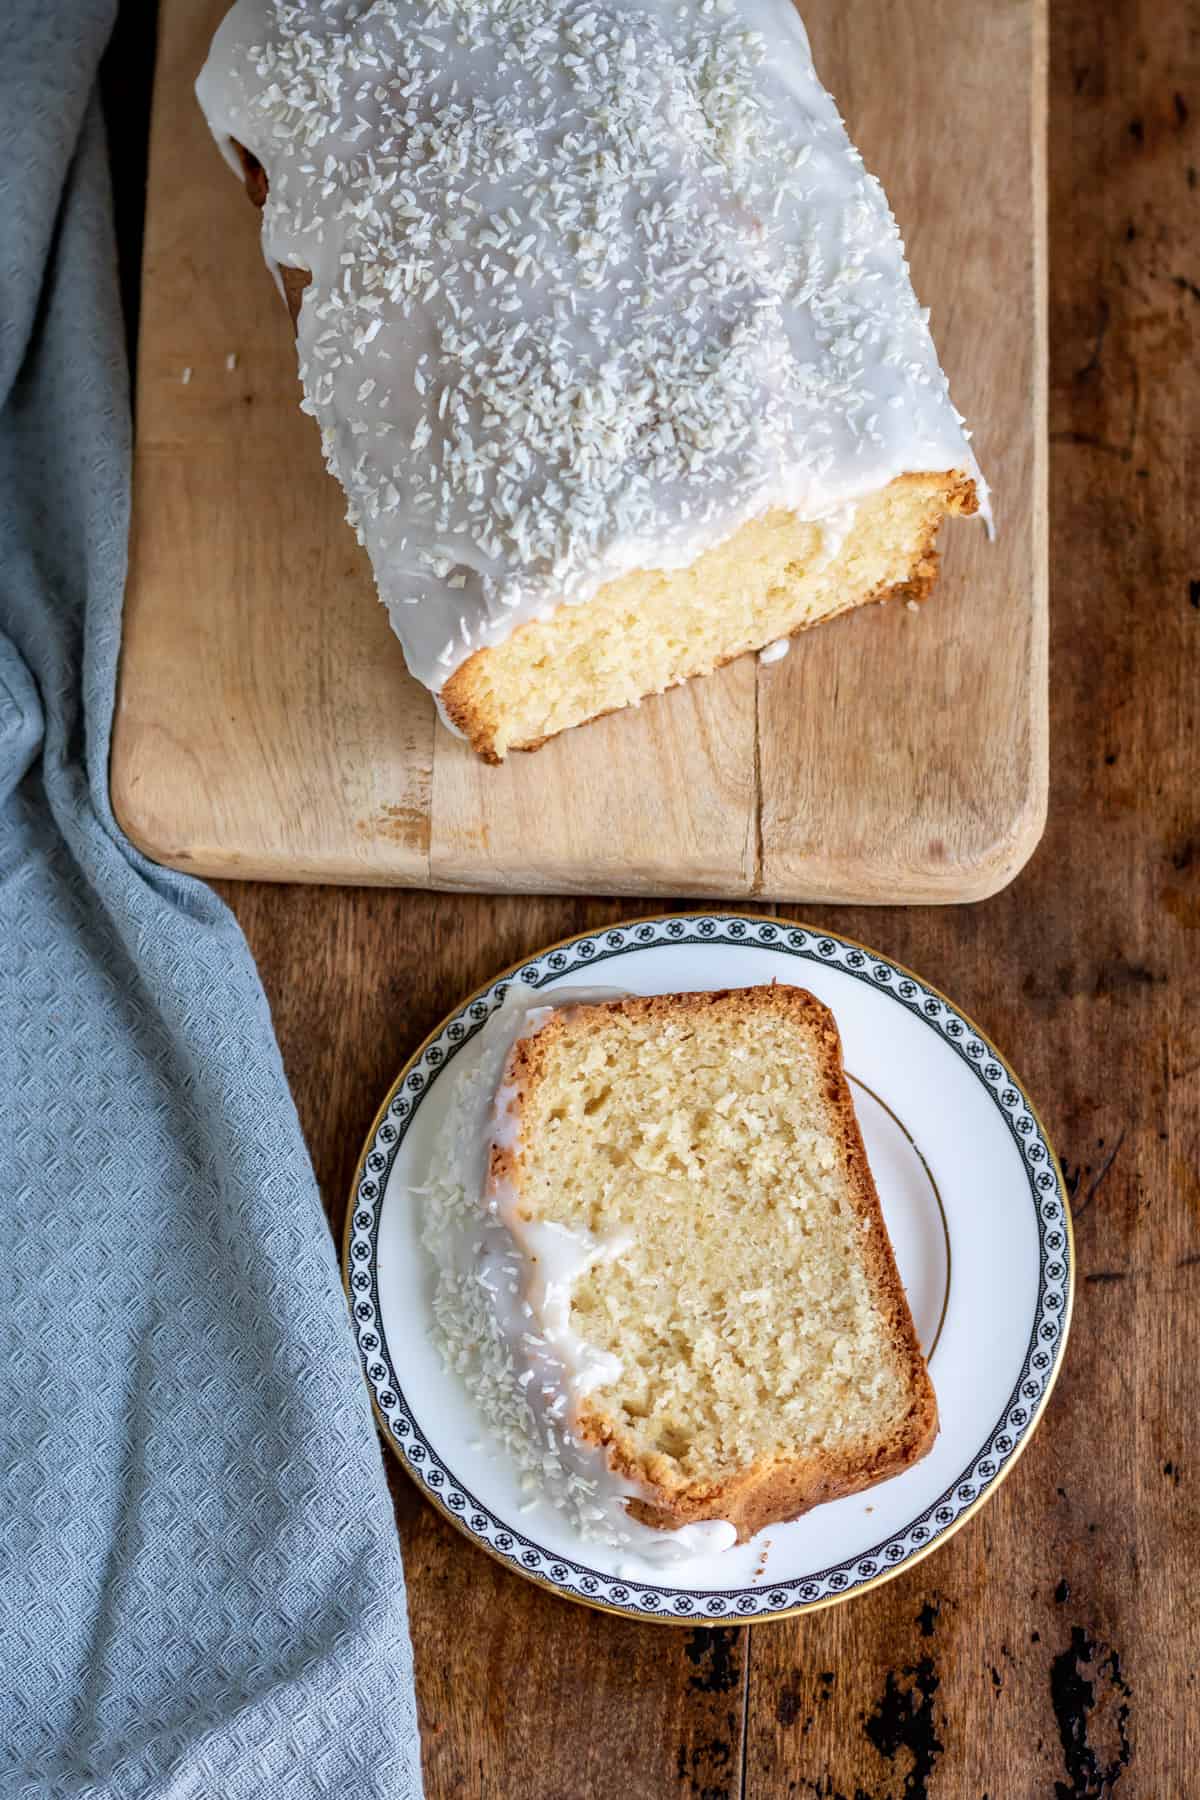 Looking down at a wooden table with a coconut loaf cake and a slice on a plate.